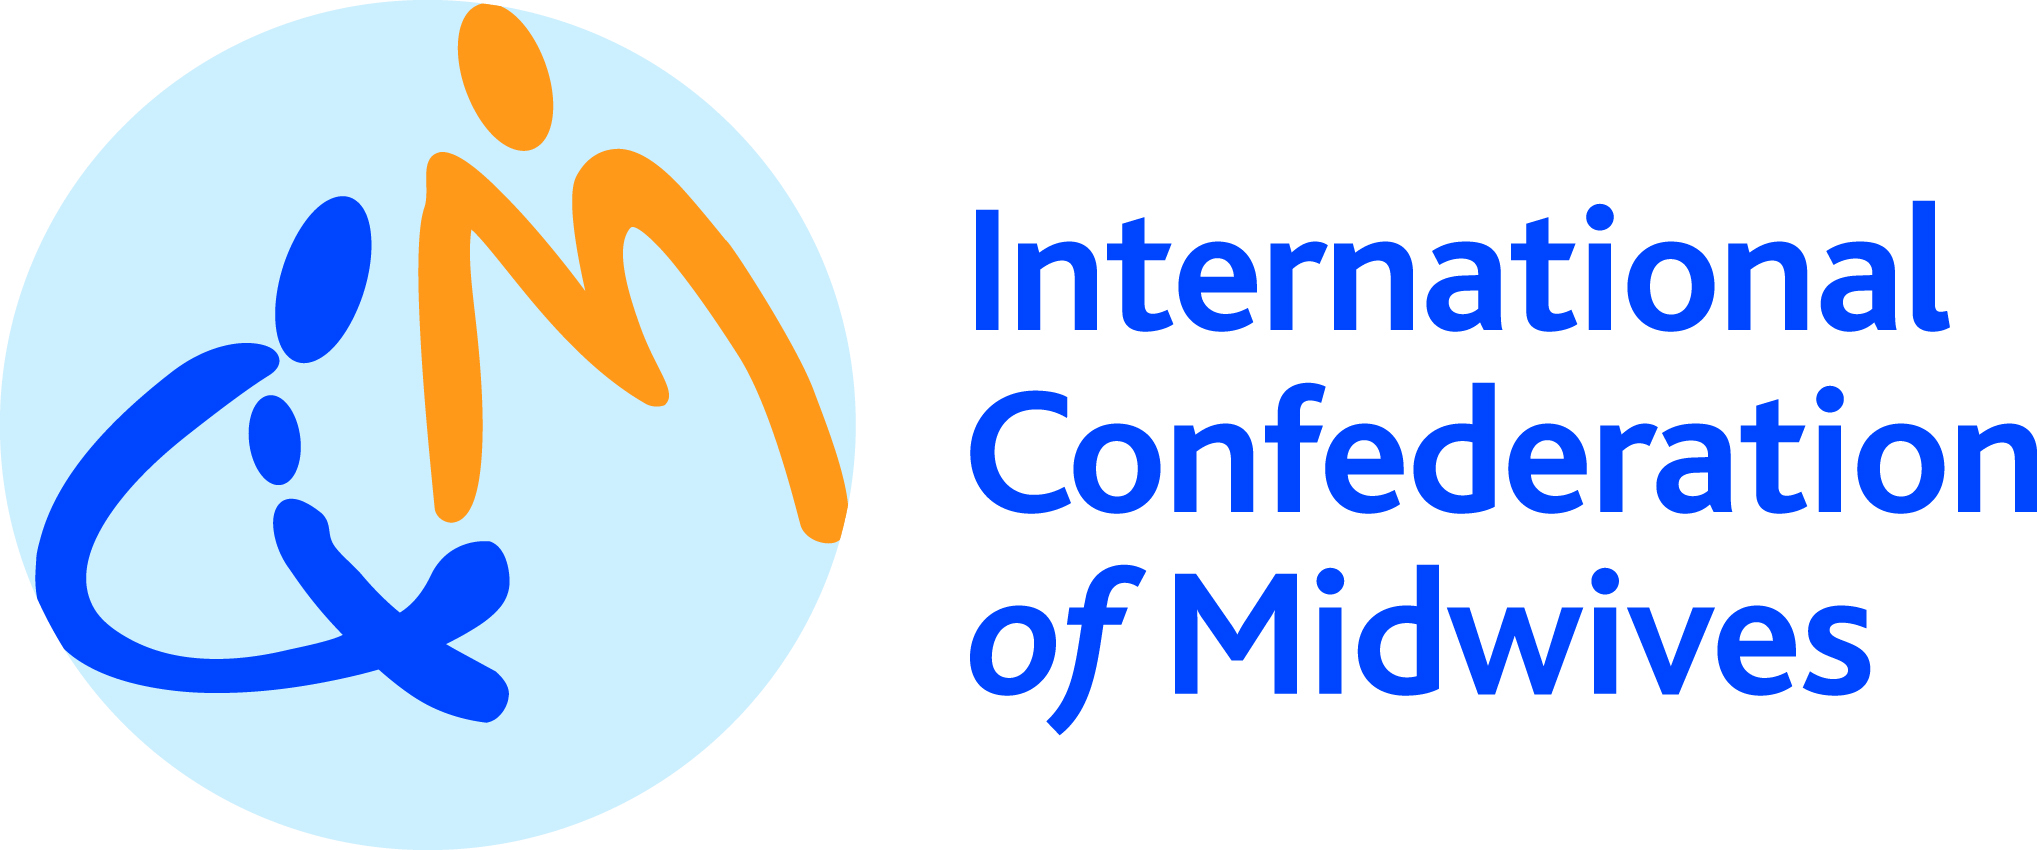 ICM Logo - ICM - The International Confederation of Midwives supports midwives